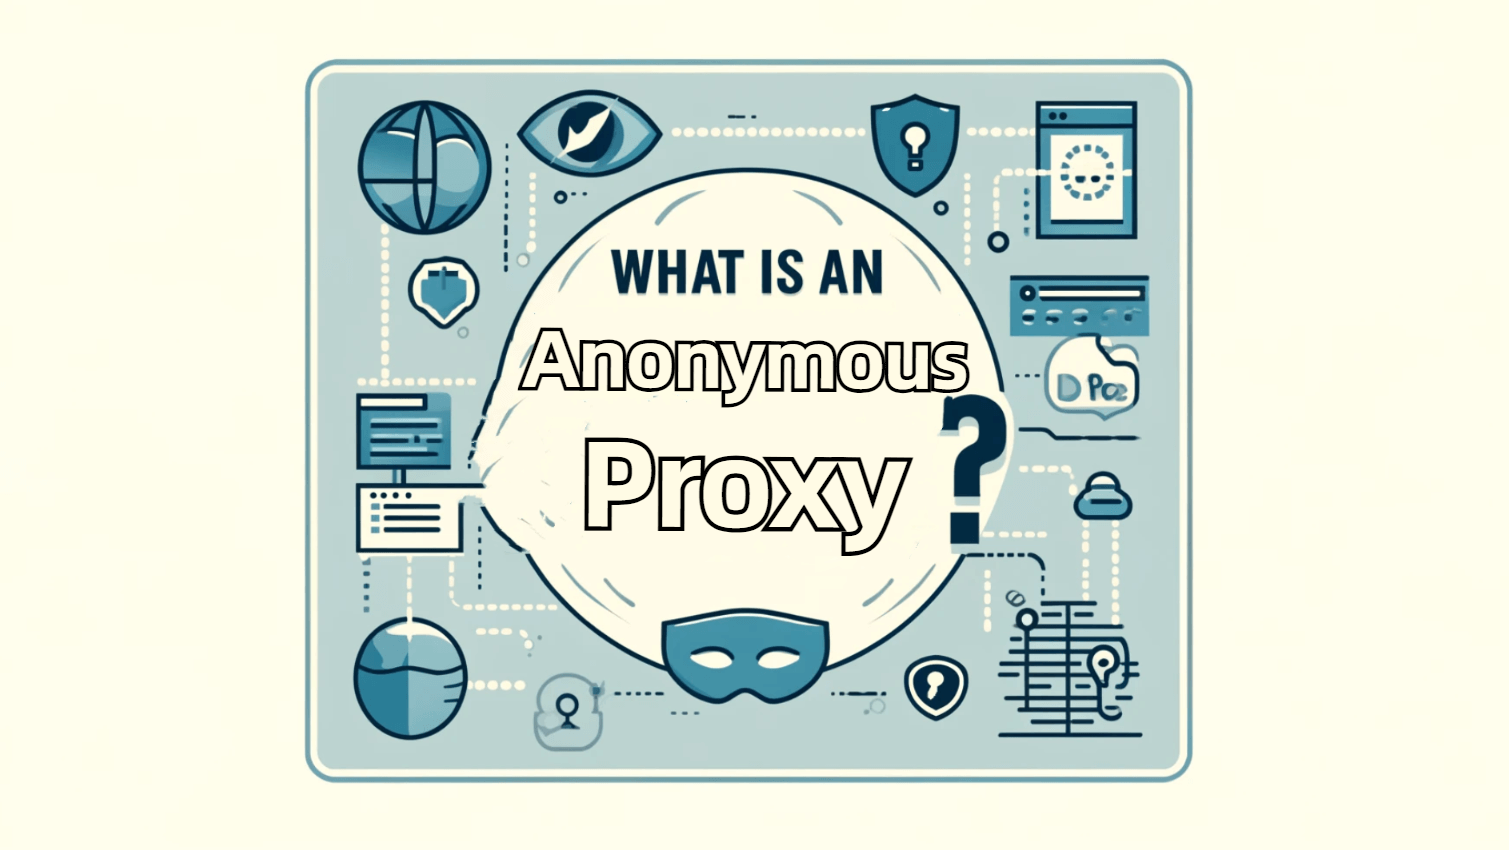 Why I Get an Anonymous Proxy Error